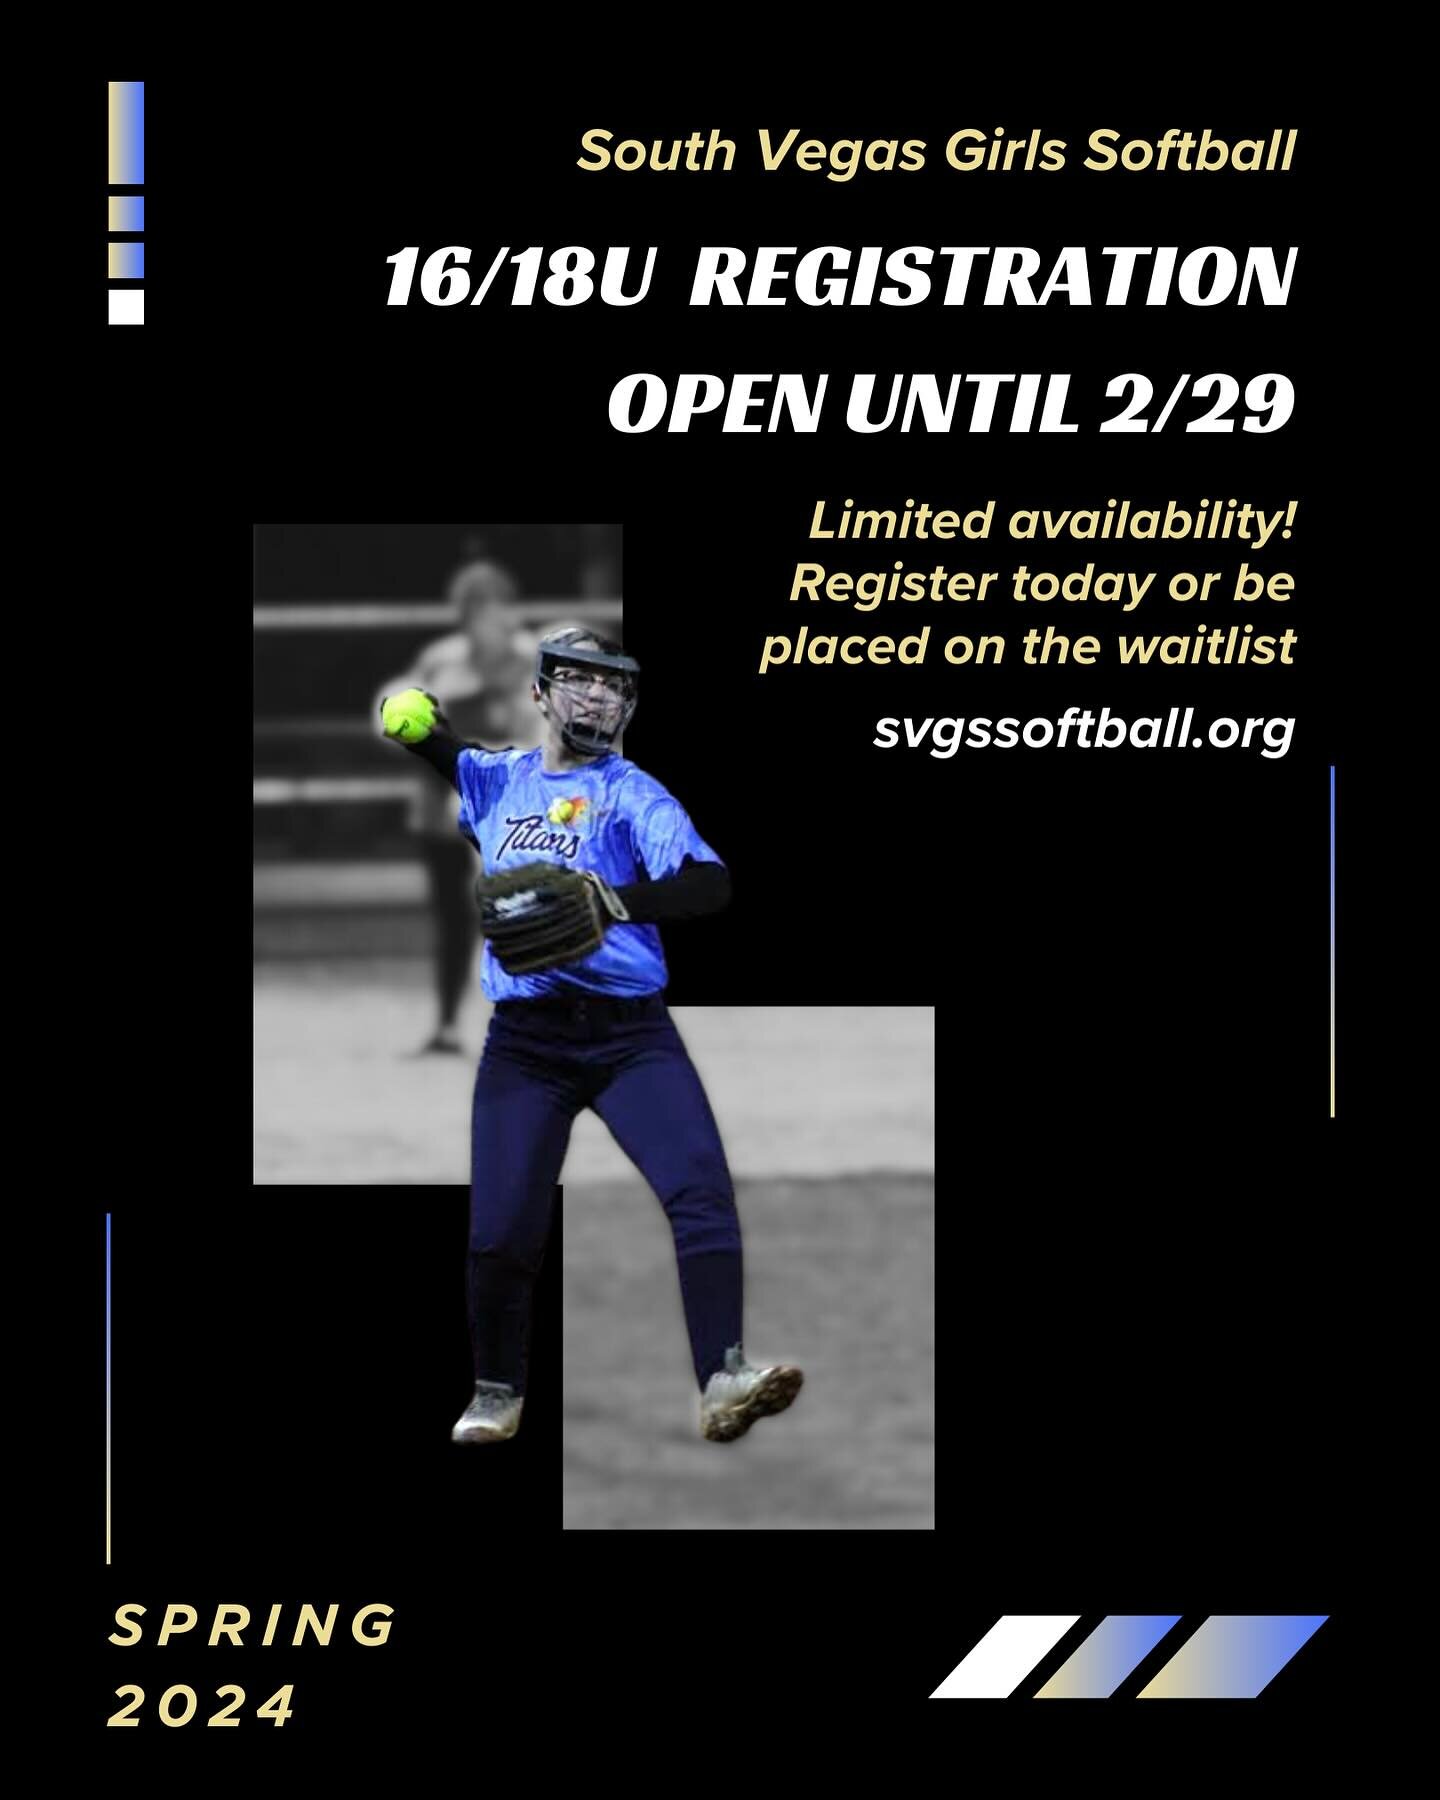 🌼Spring into action!🌼

Our 16/18U Spring Registration is open until Thursday, February 29th. There are limited spots available! We will have a waitlist opportunity for those who get in too late in hopes of building another team but cannot guarantee